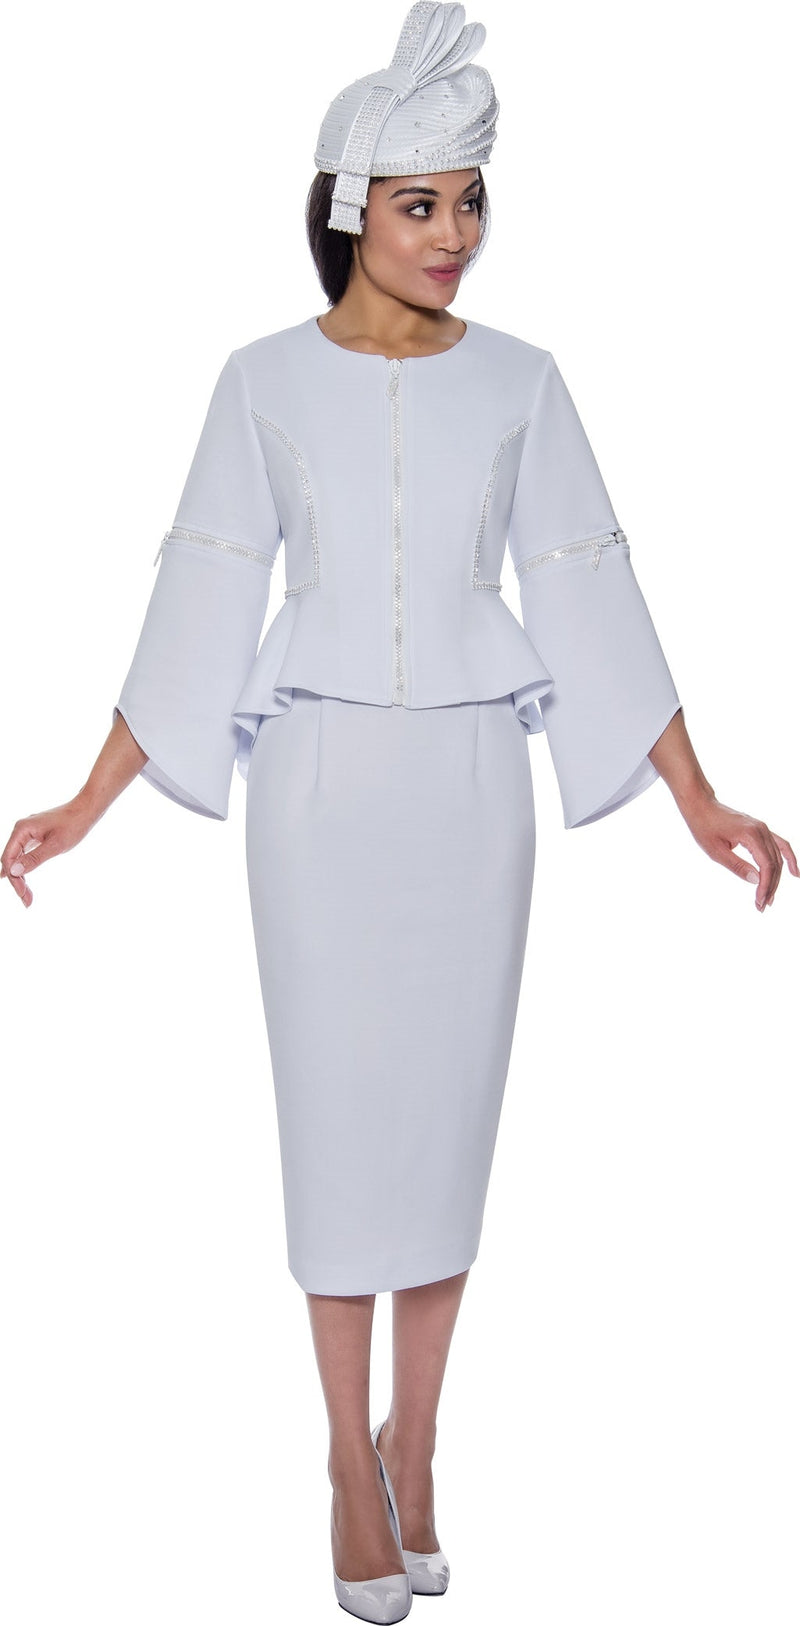 GMI Church Suit 9562-White - Church Suits For Less